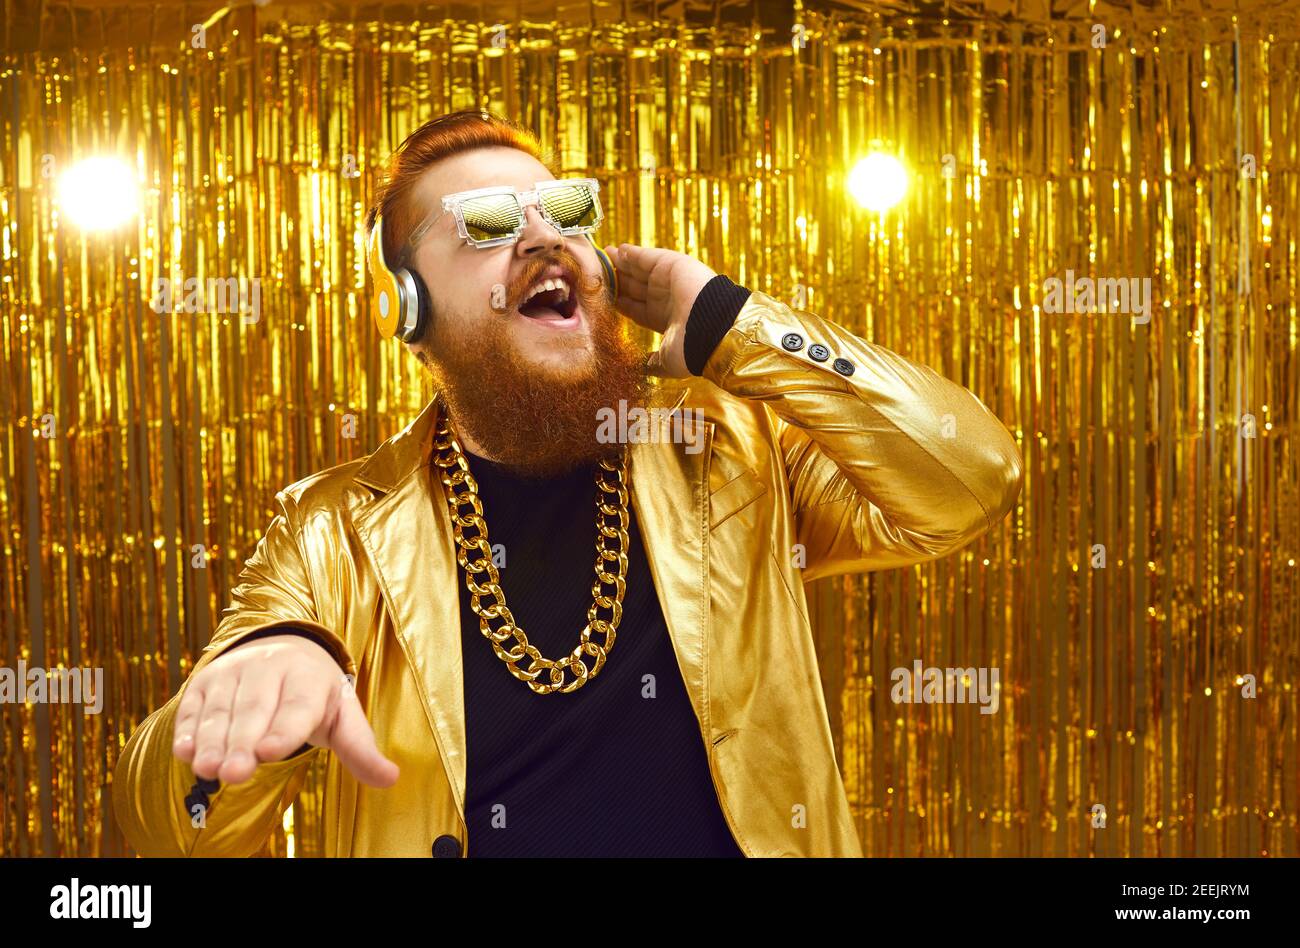 Happy DJ in shiny golden jacket, headphones and cool sunglasses playing loud music Stock Photo